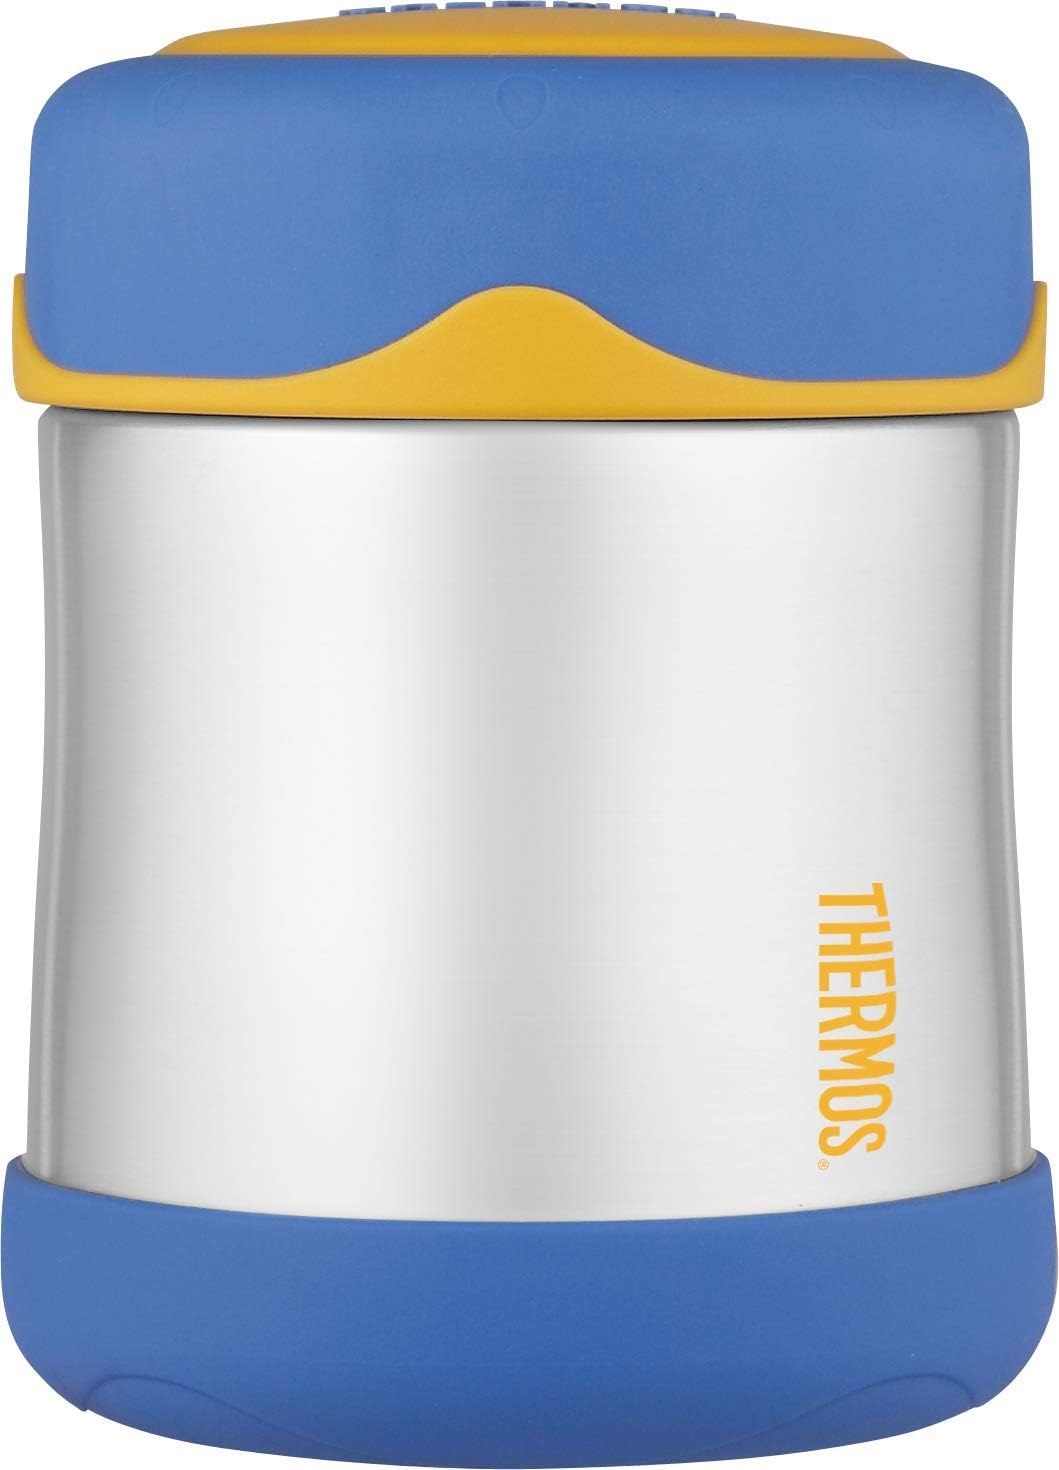 Thermos Stainless Steel Food Flask